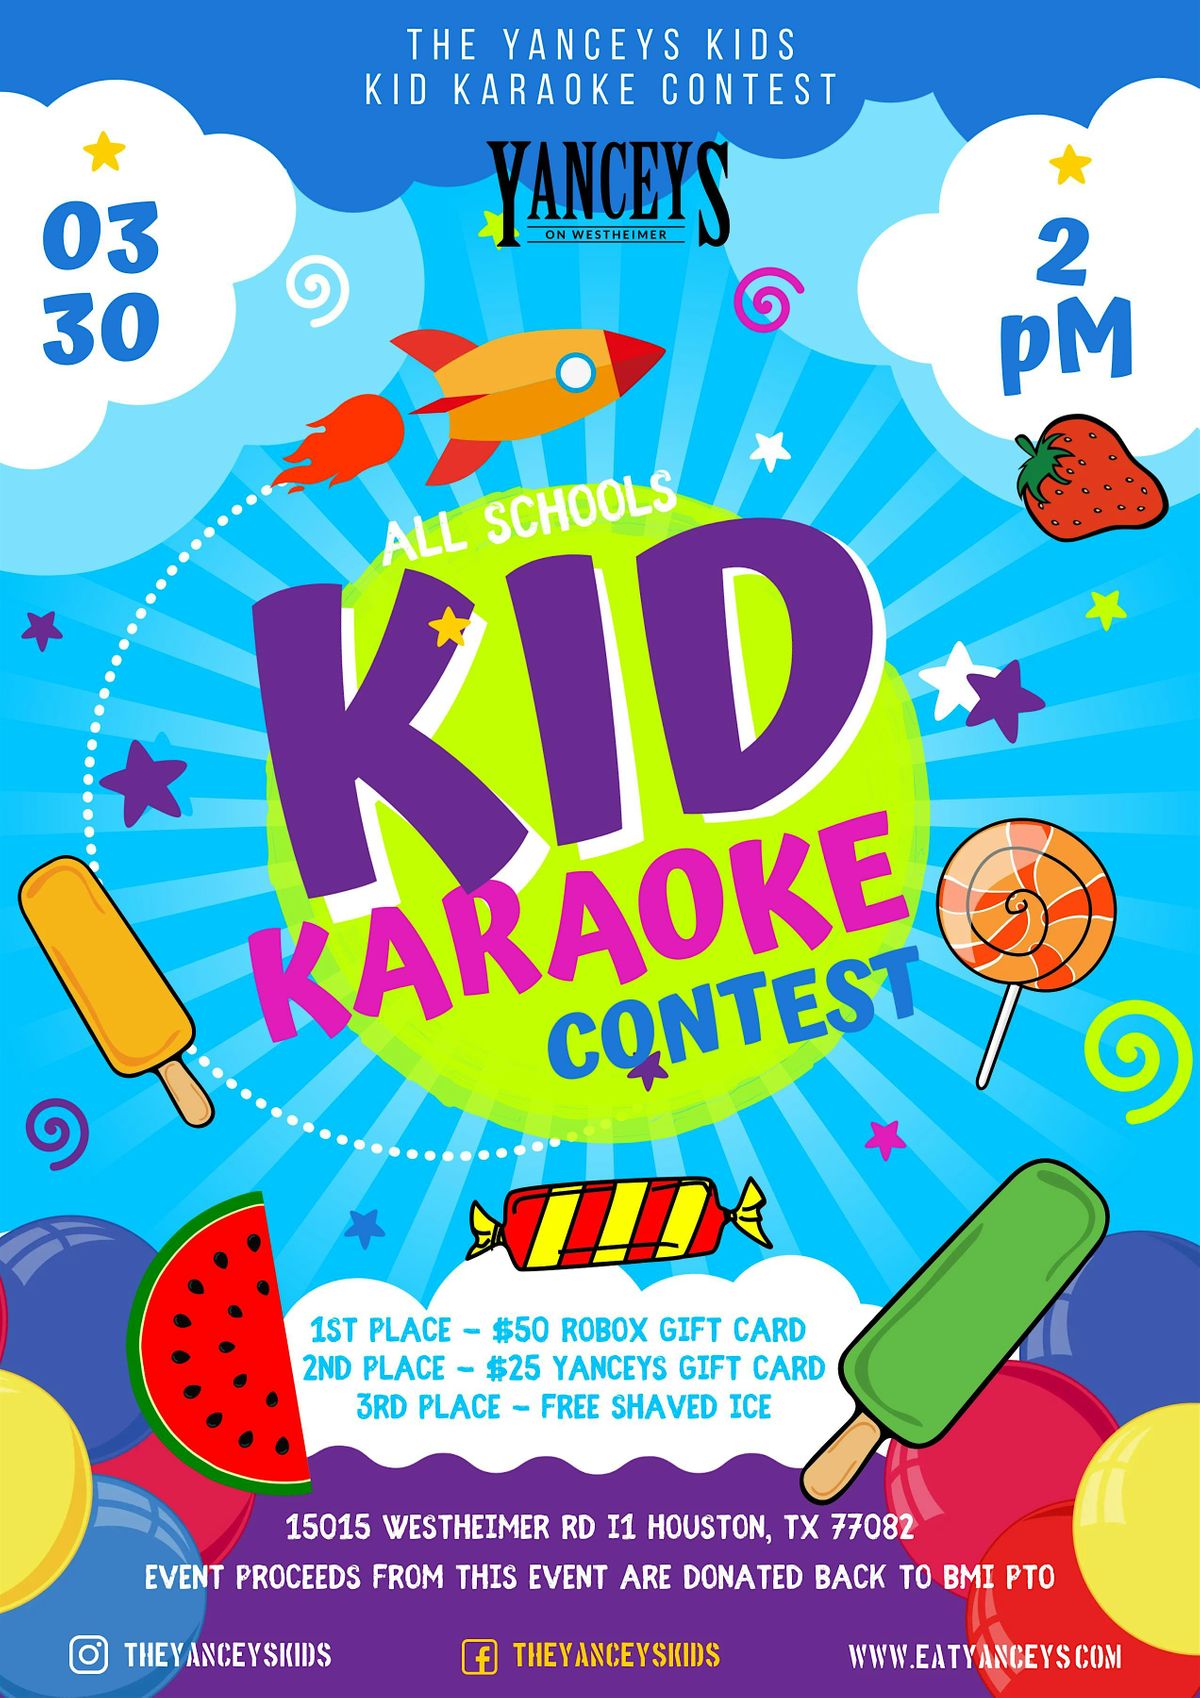 Kids Karaoke Contest: Sing Your Heart Out and Win Big!